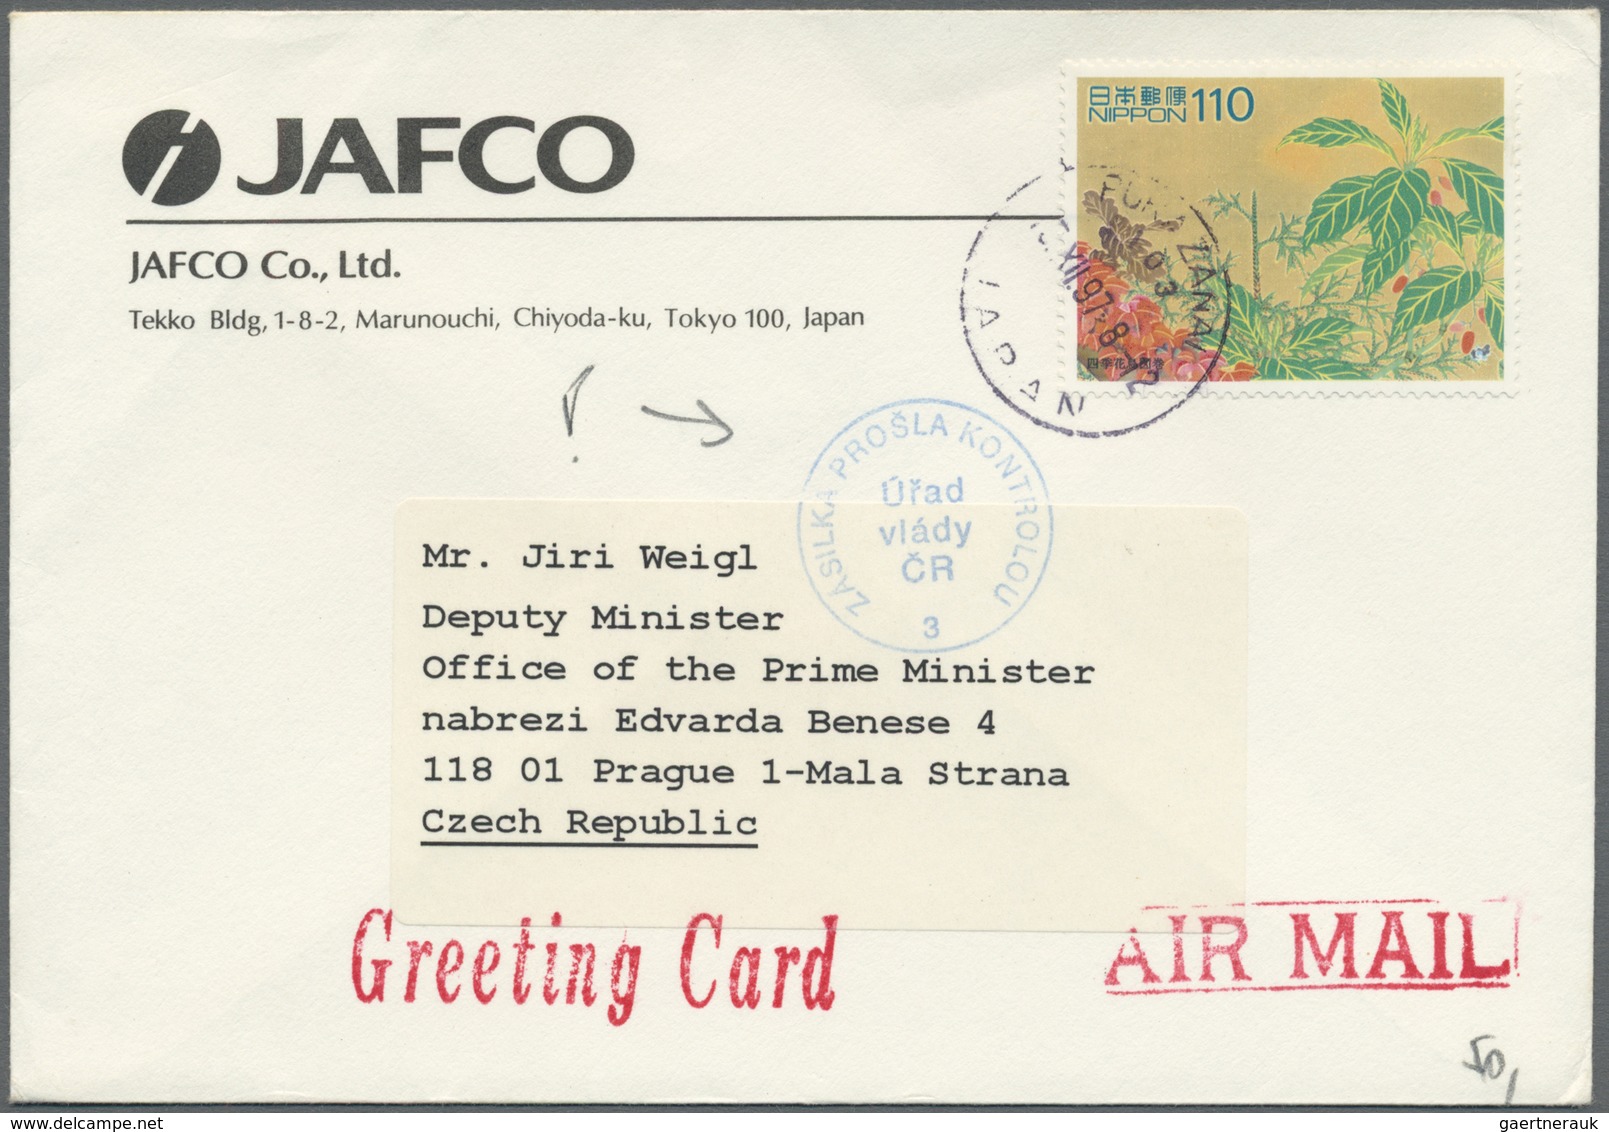 Br/GA/ Japan: 1950/90 (ca.), about 200 covers/used ppc/few used stationery, all gone to abroad, inc. regist